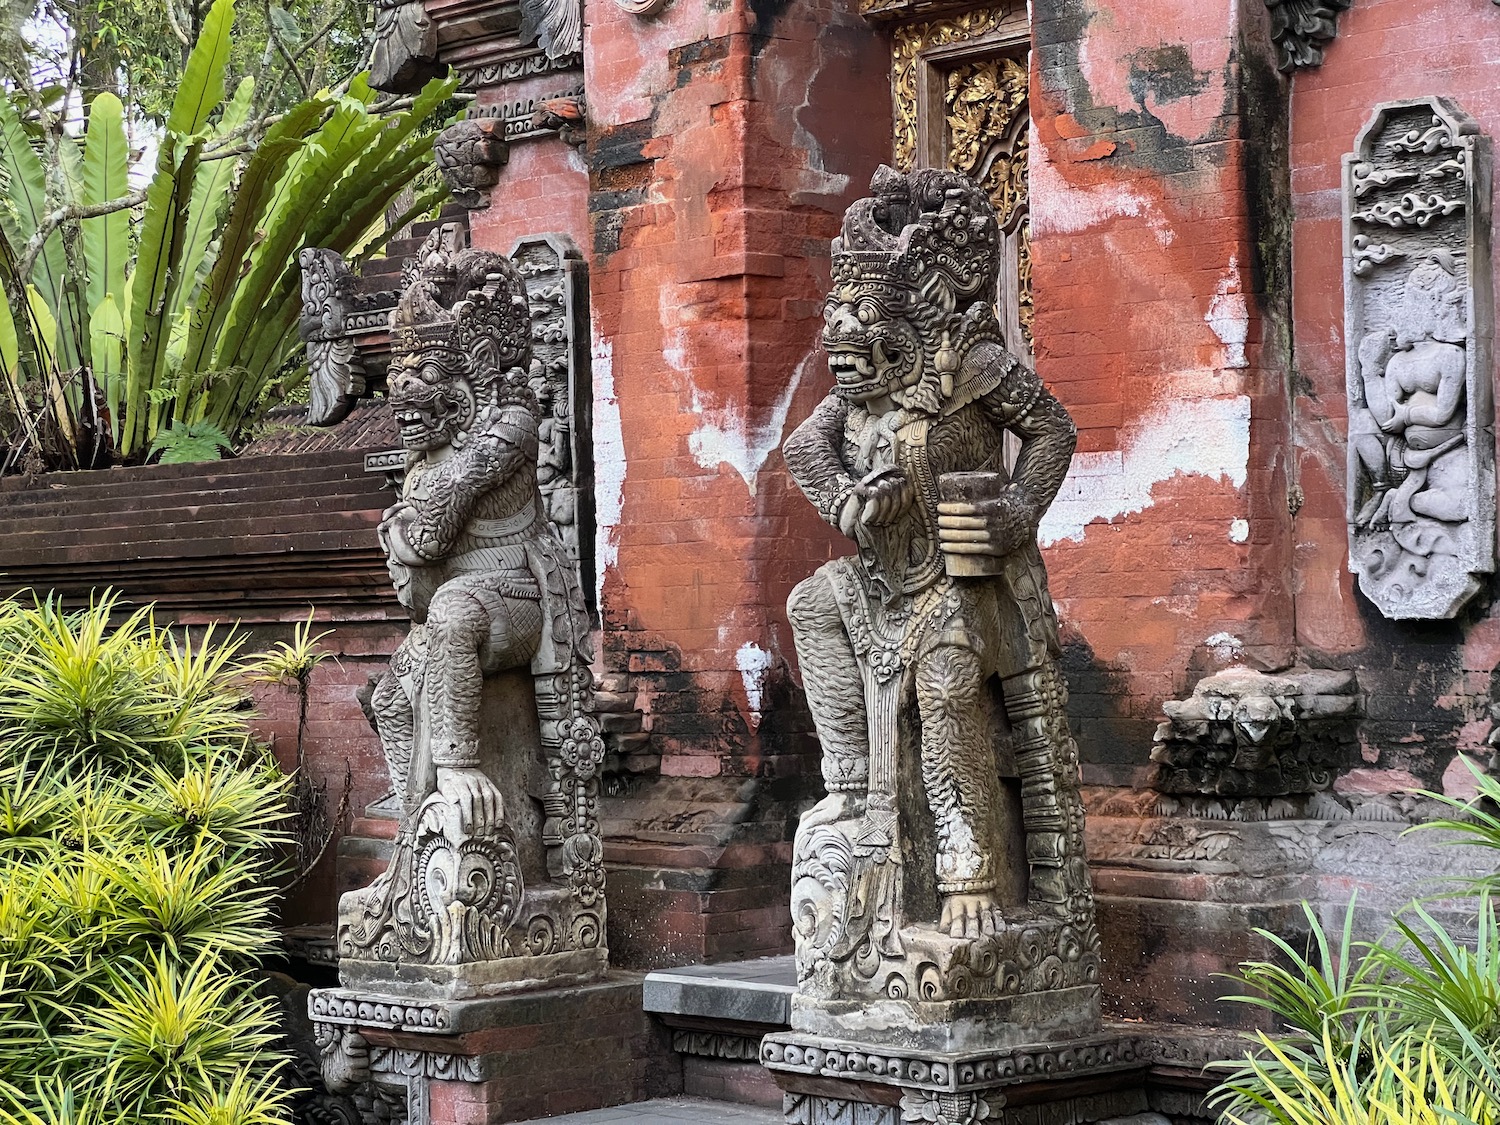 statues outside a building